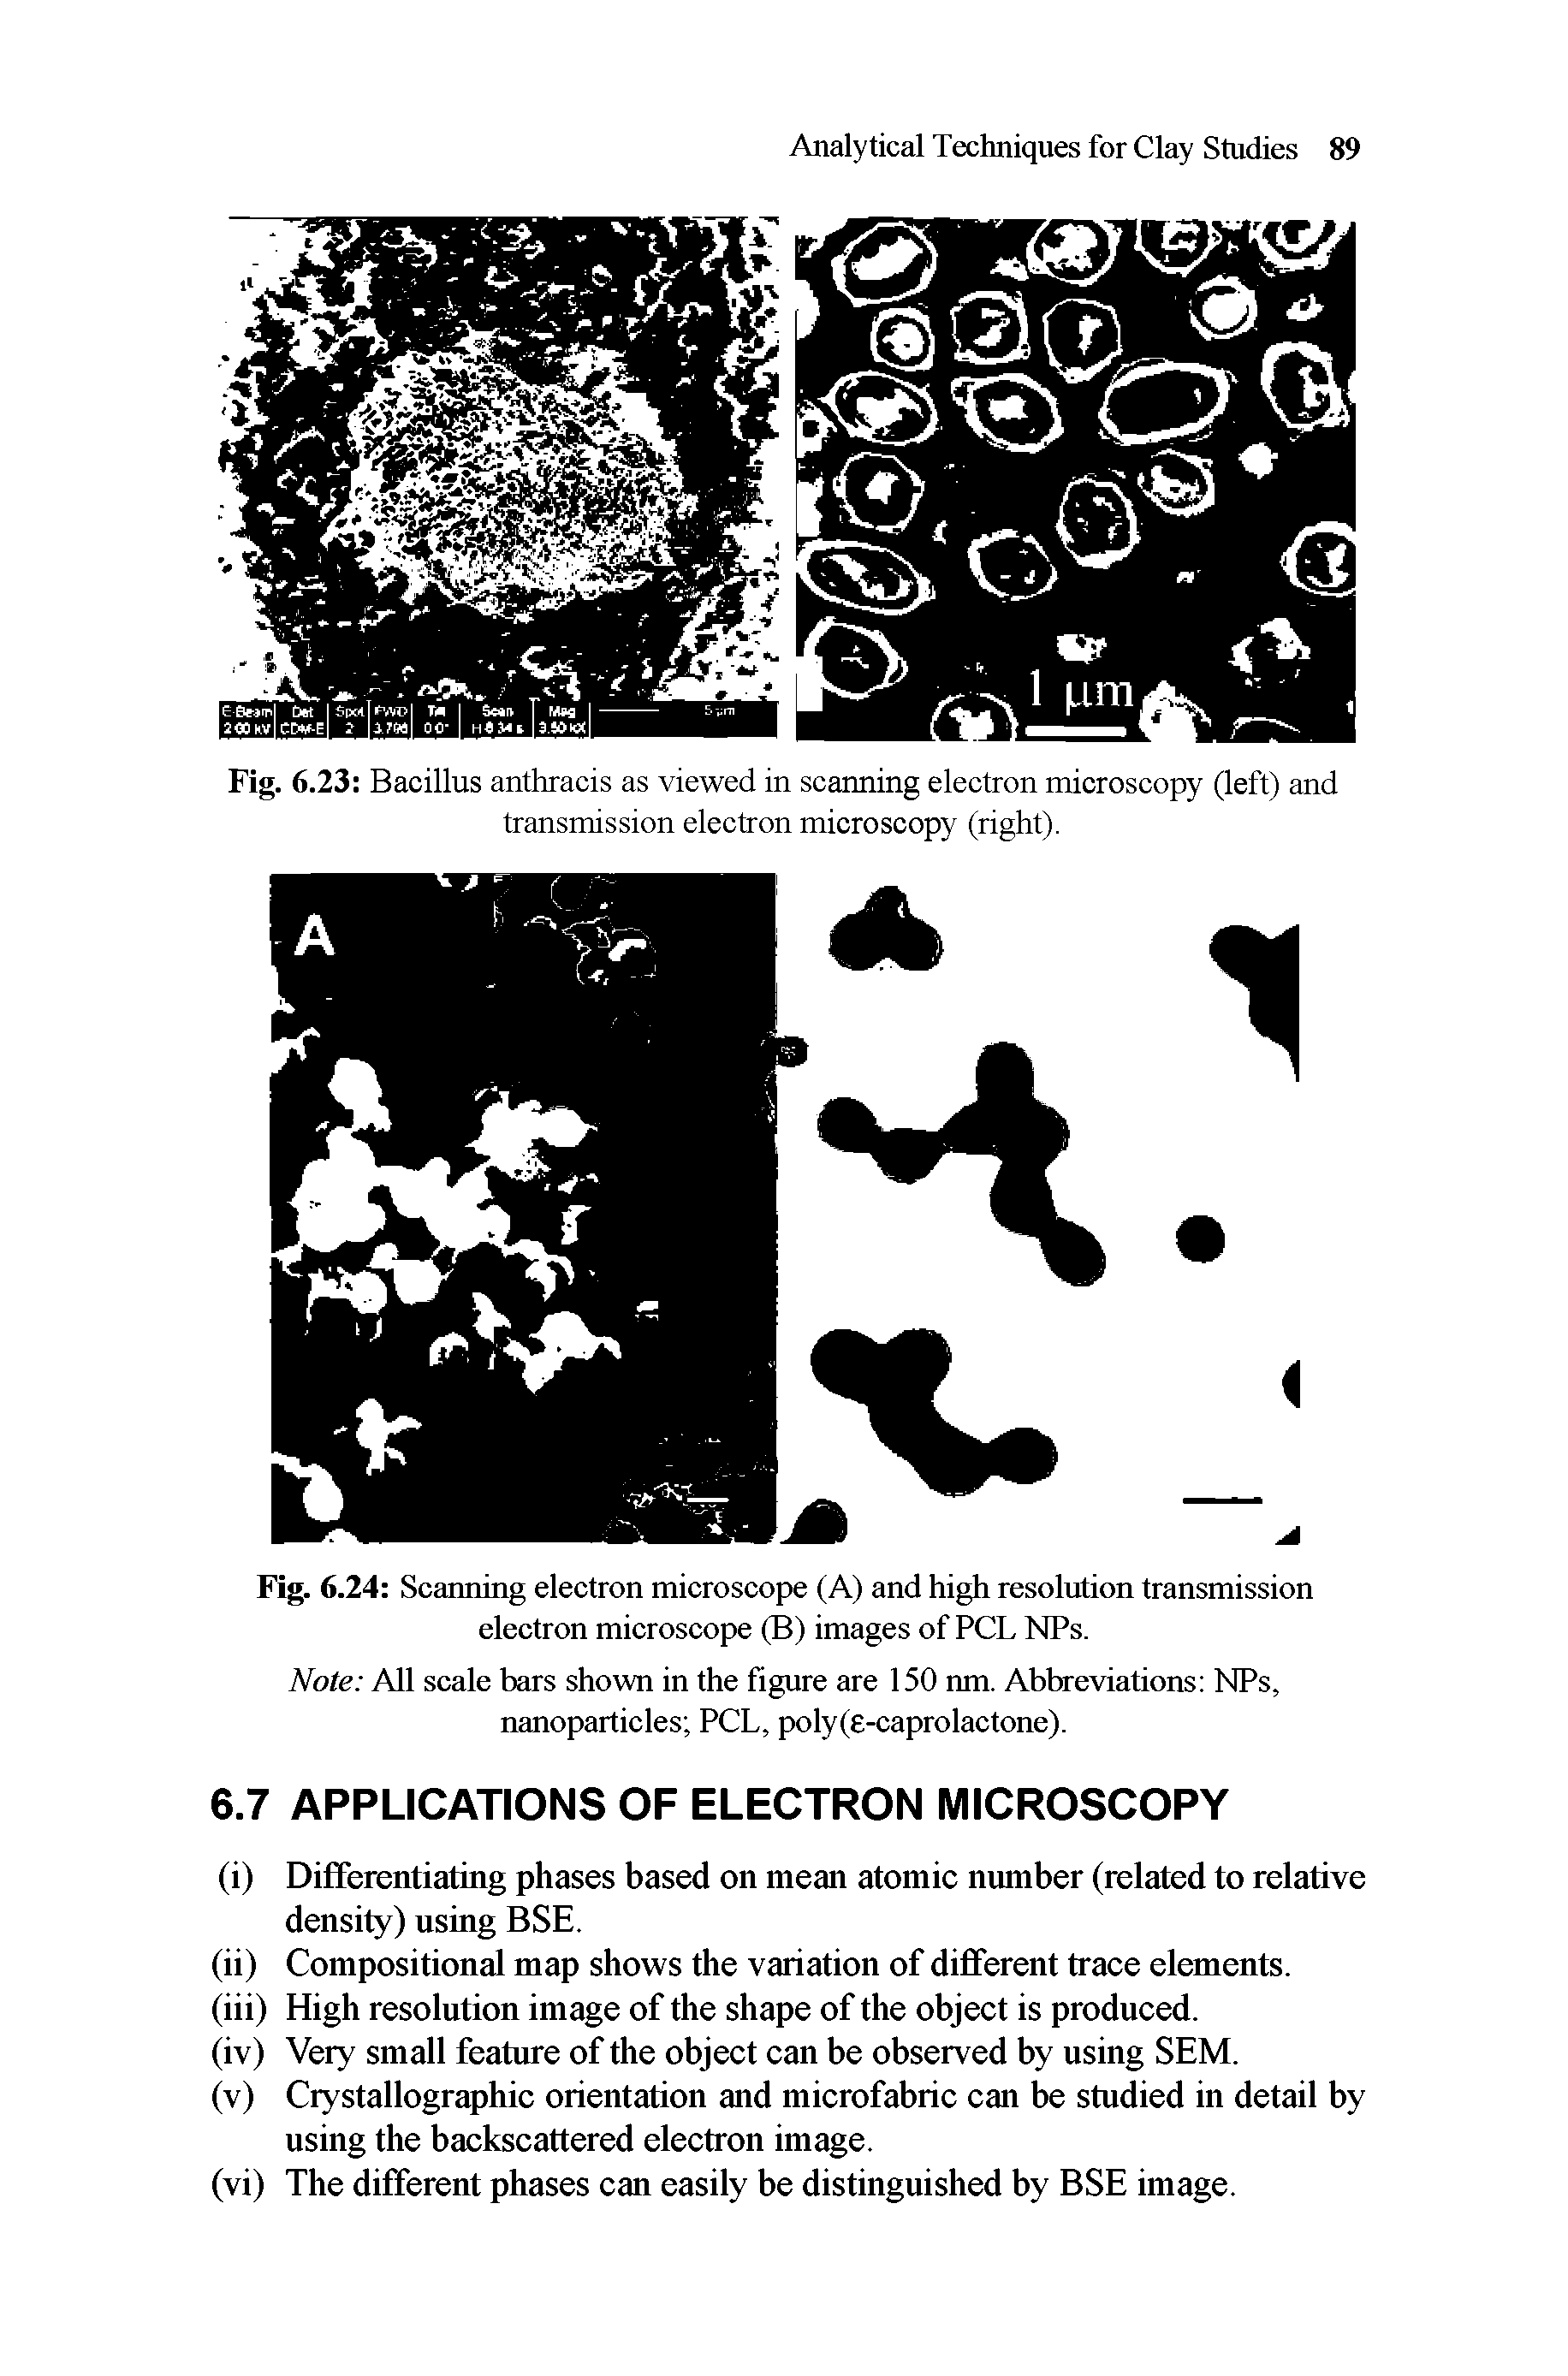 Fig. 6.24 Scanning electron microscope (A) and high resolution transmission electron microscope (B) images of PCL NPs.